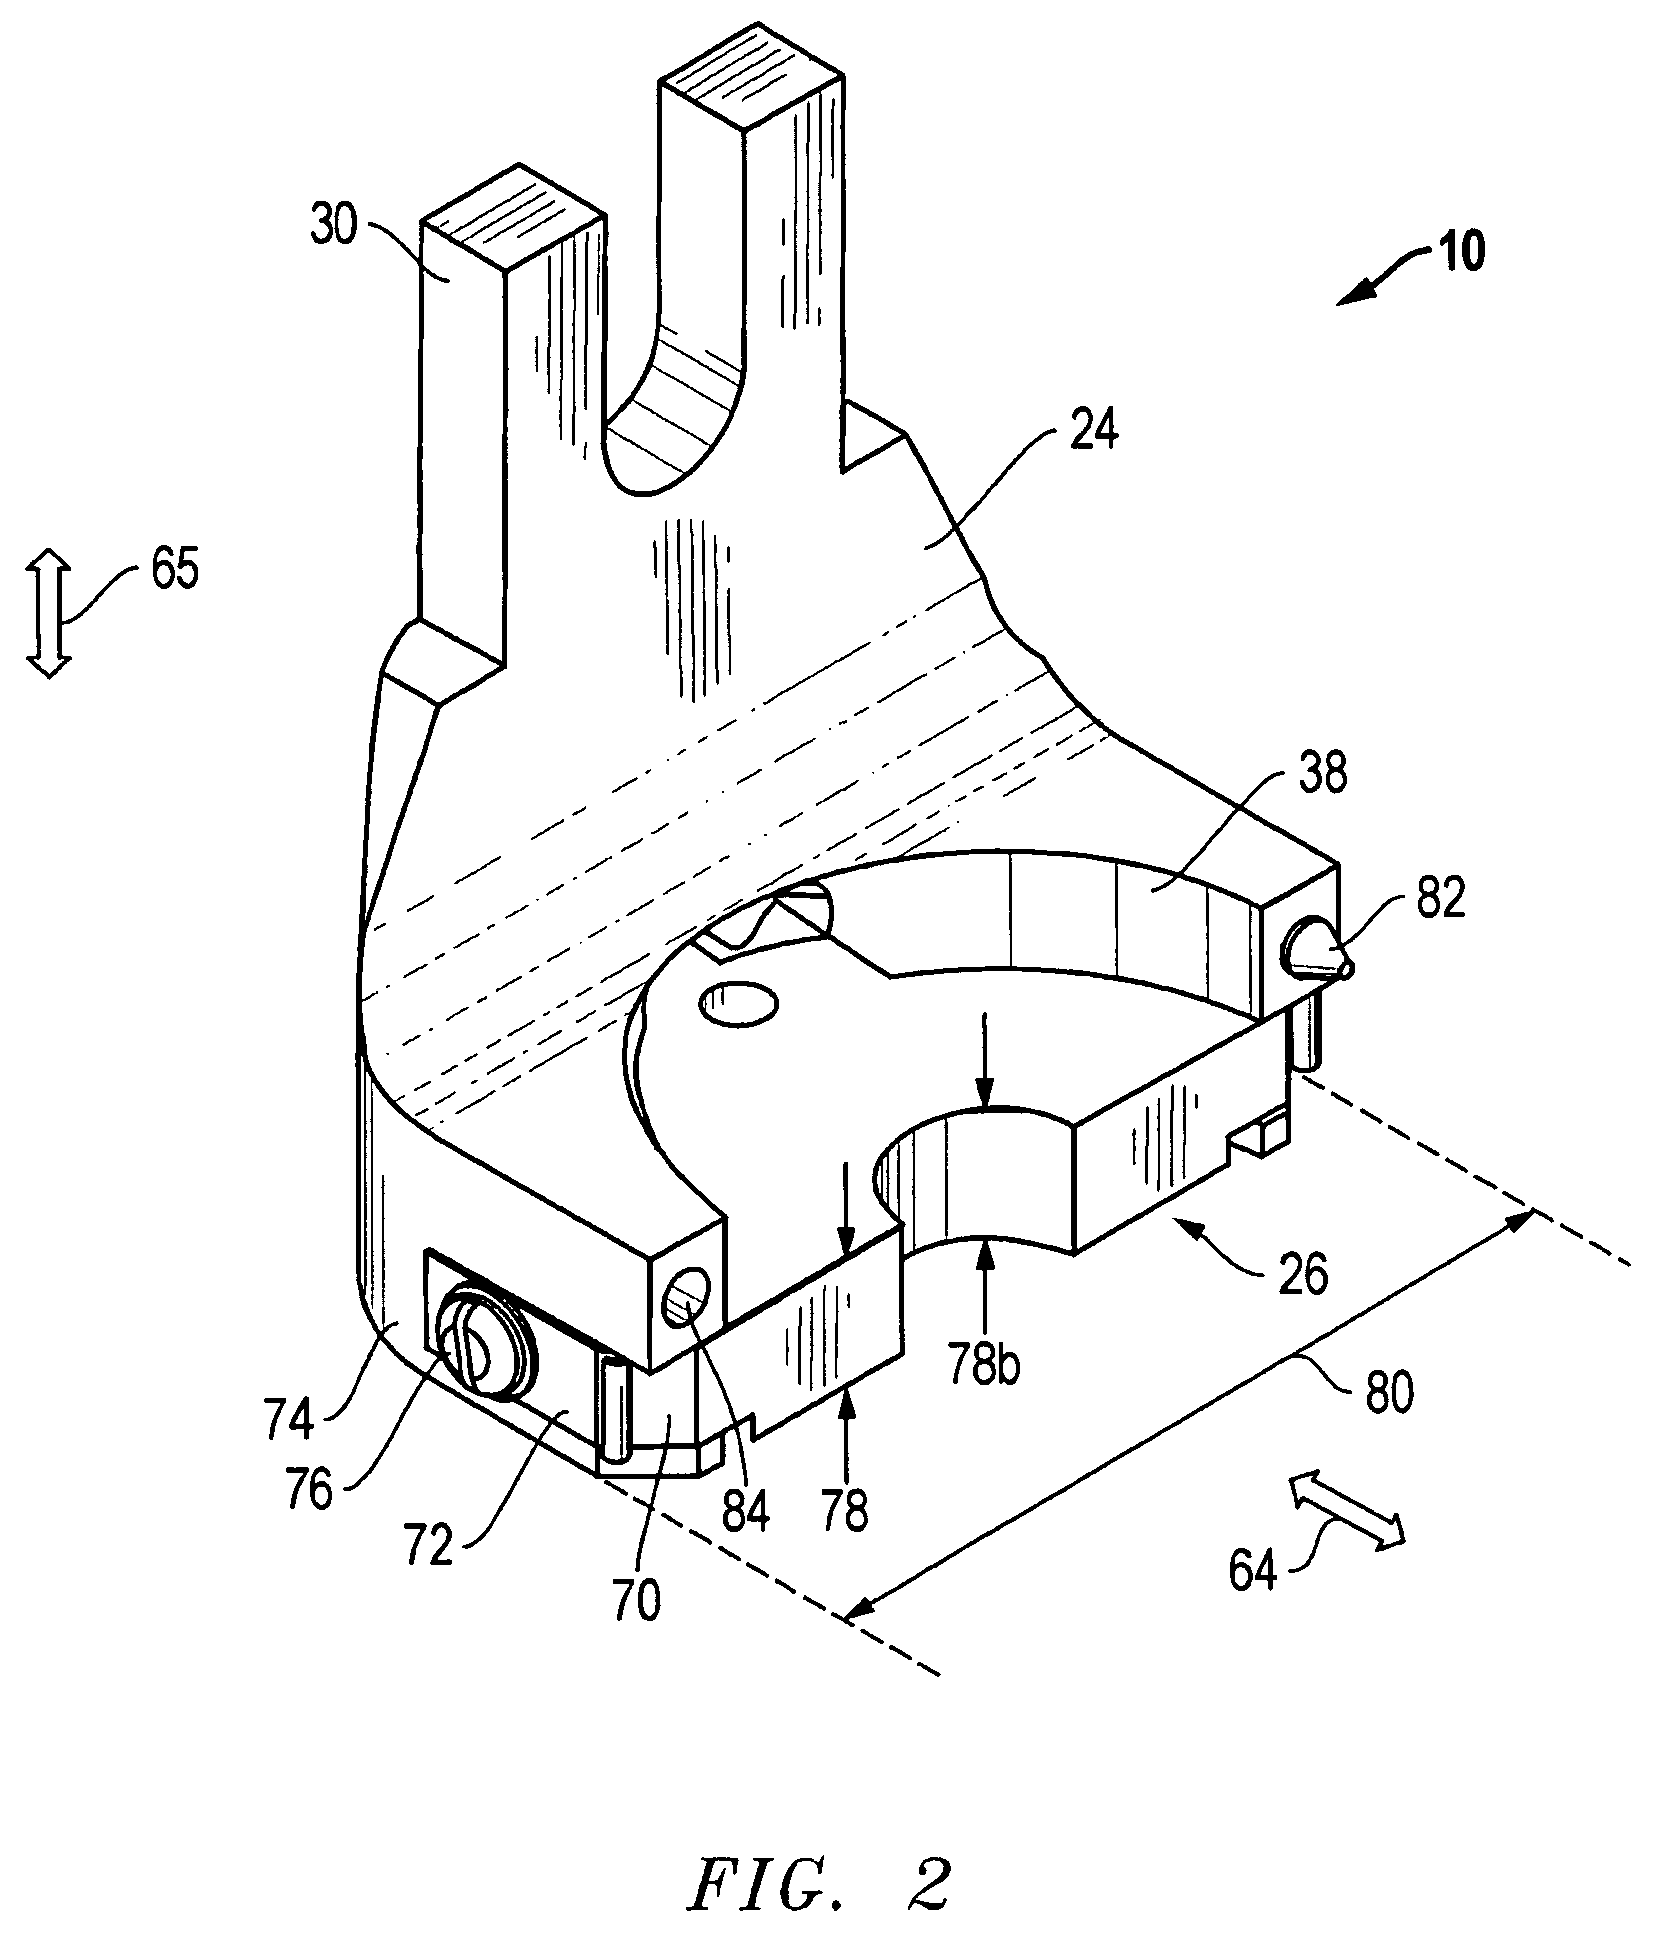 System, method, and apparatus for interchangeably accommodating both fixed and floating takeout inserts